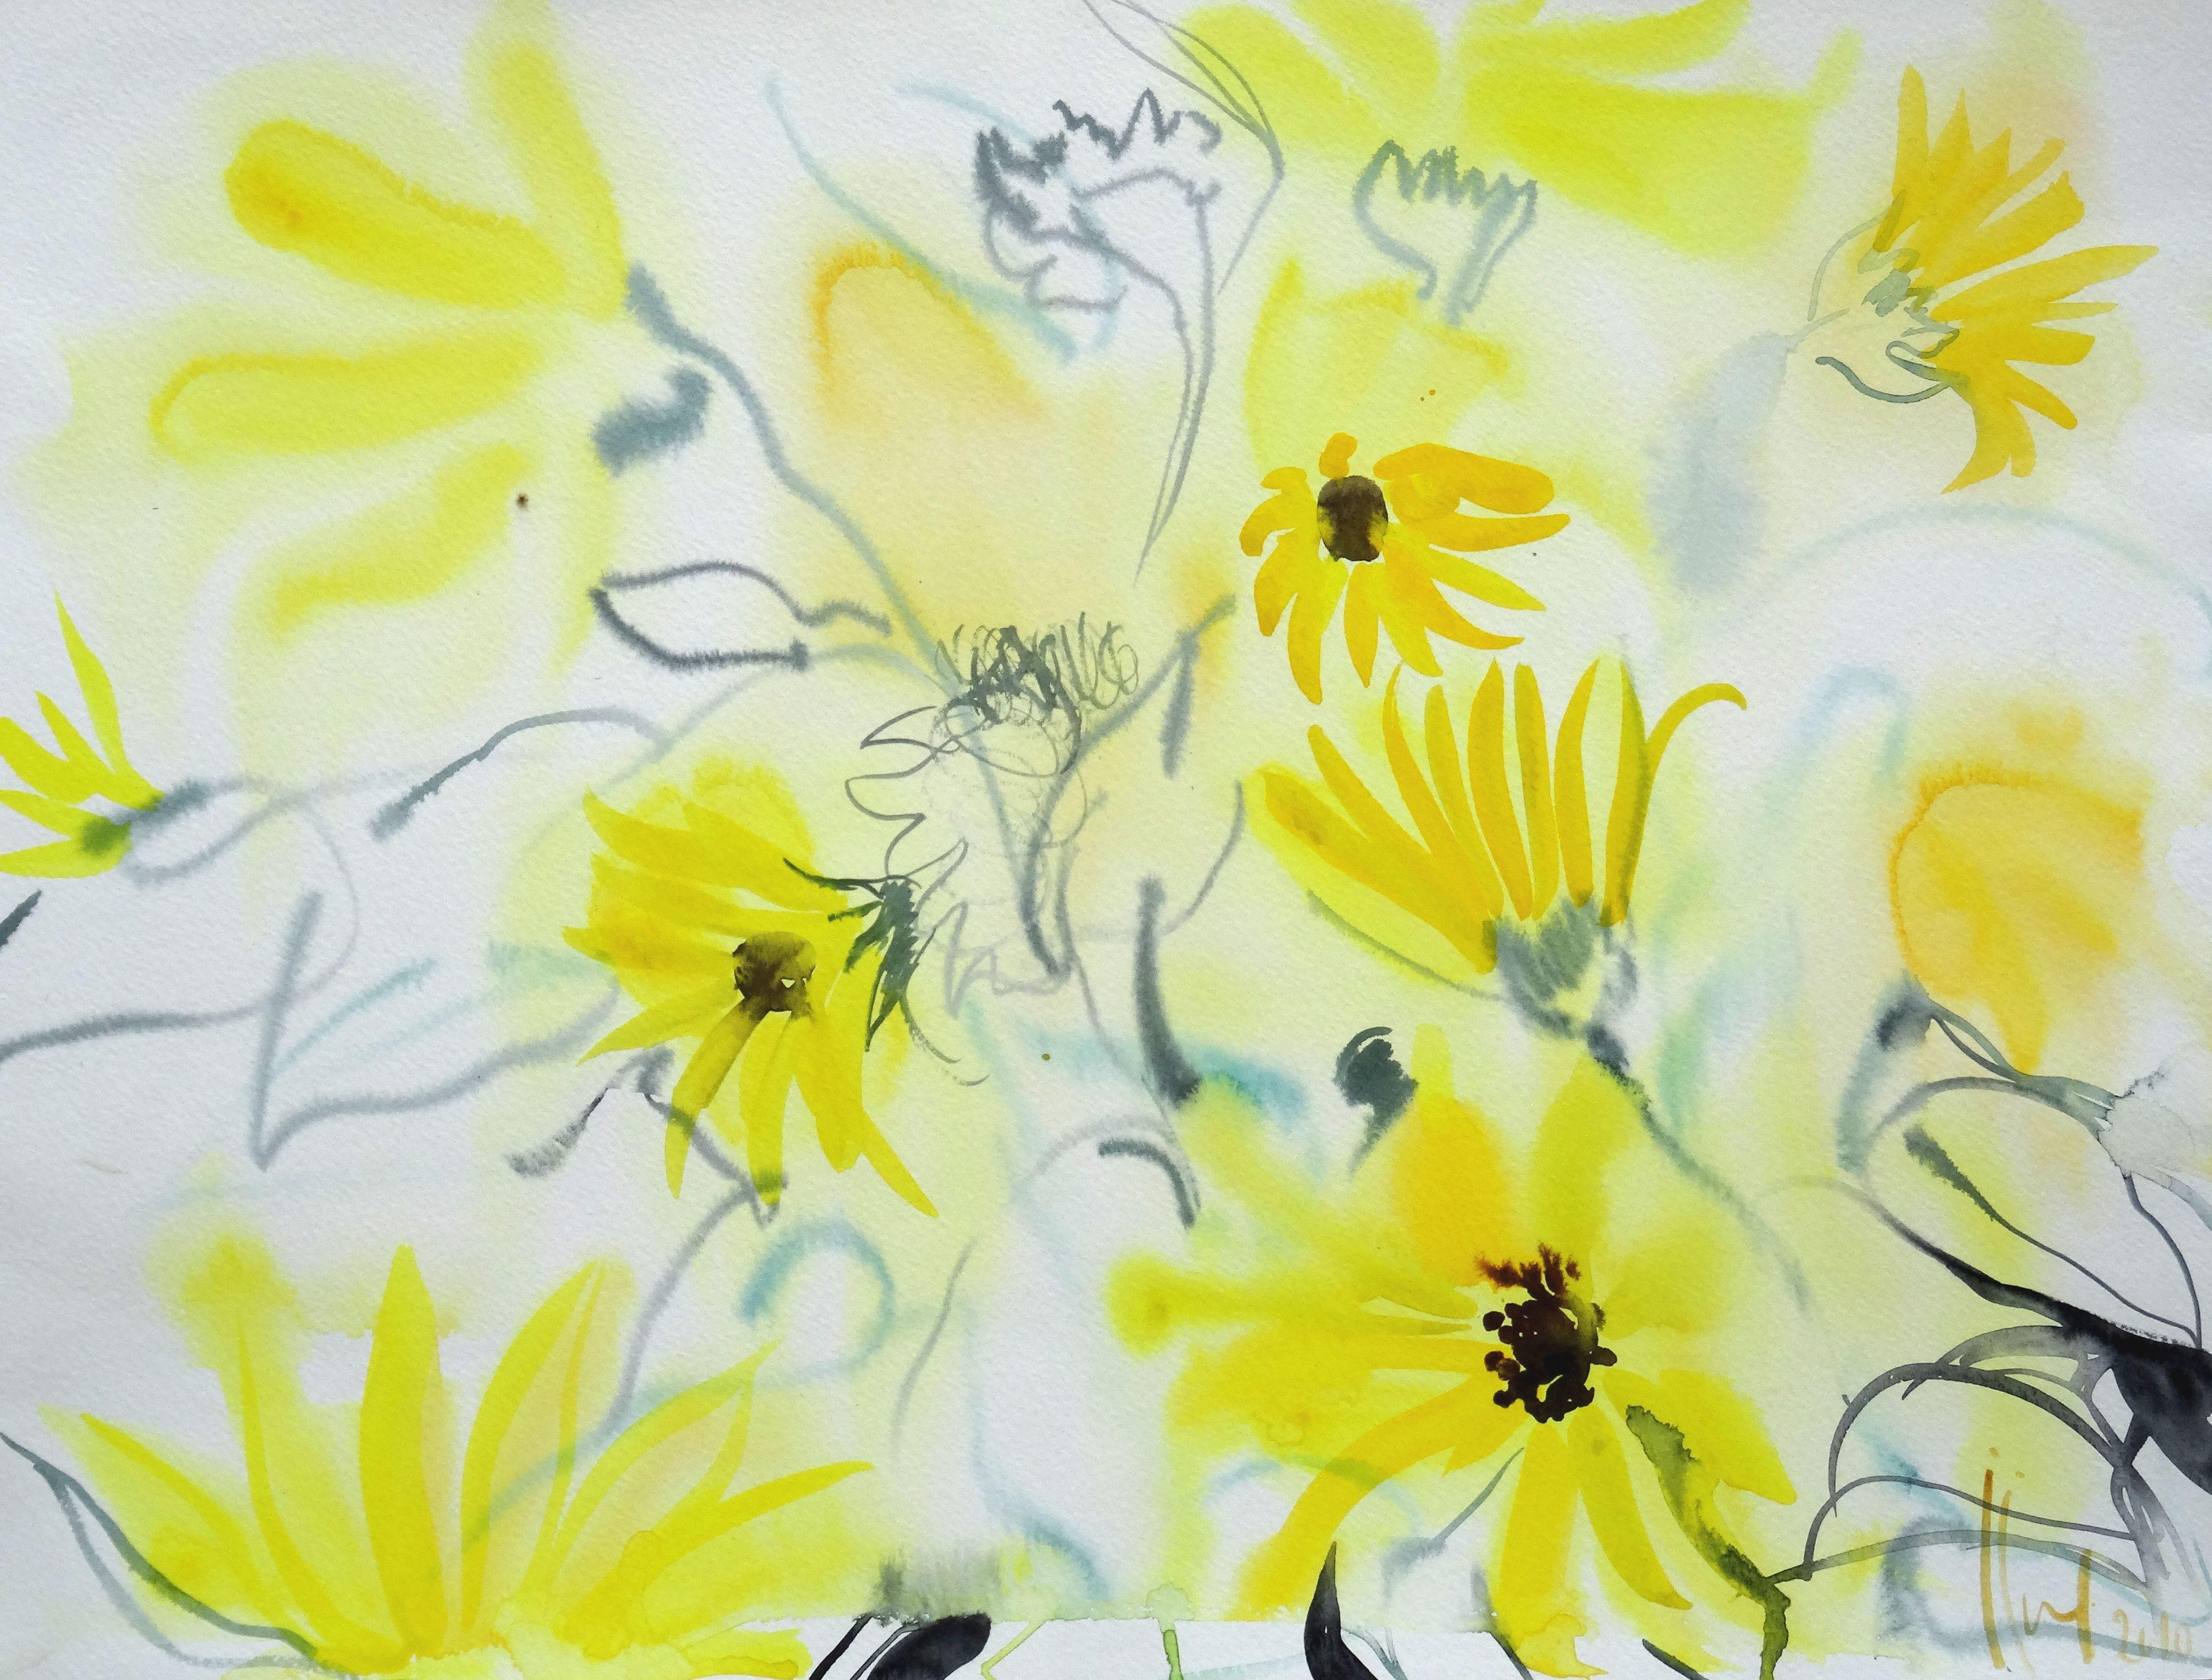 Yellow flowers at Tuileries garden. 2010. Watercolor on paper, 24x50 cm